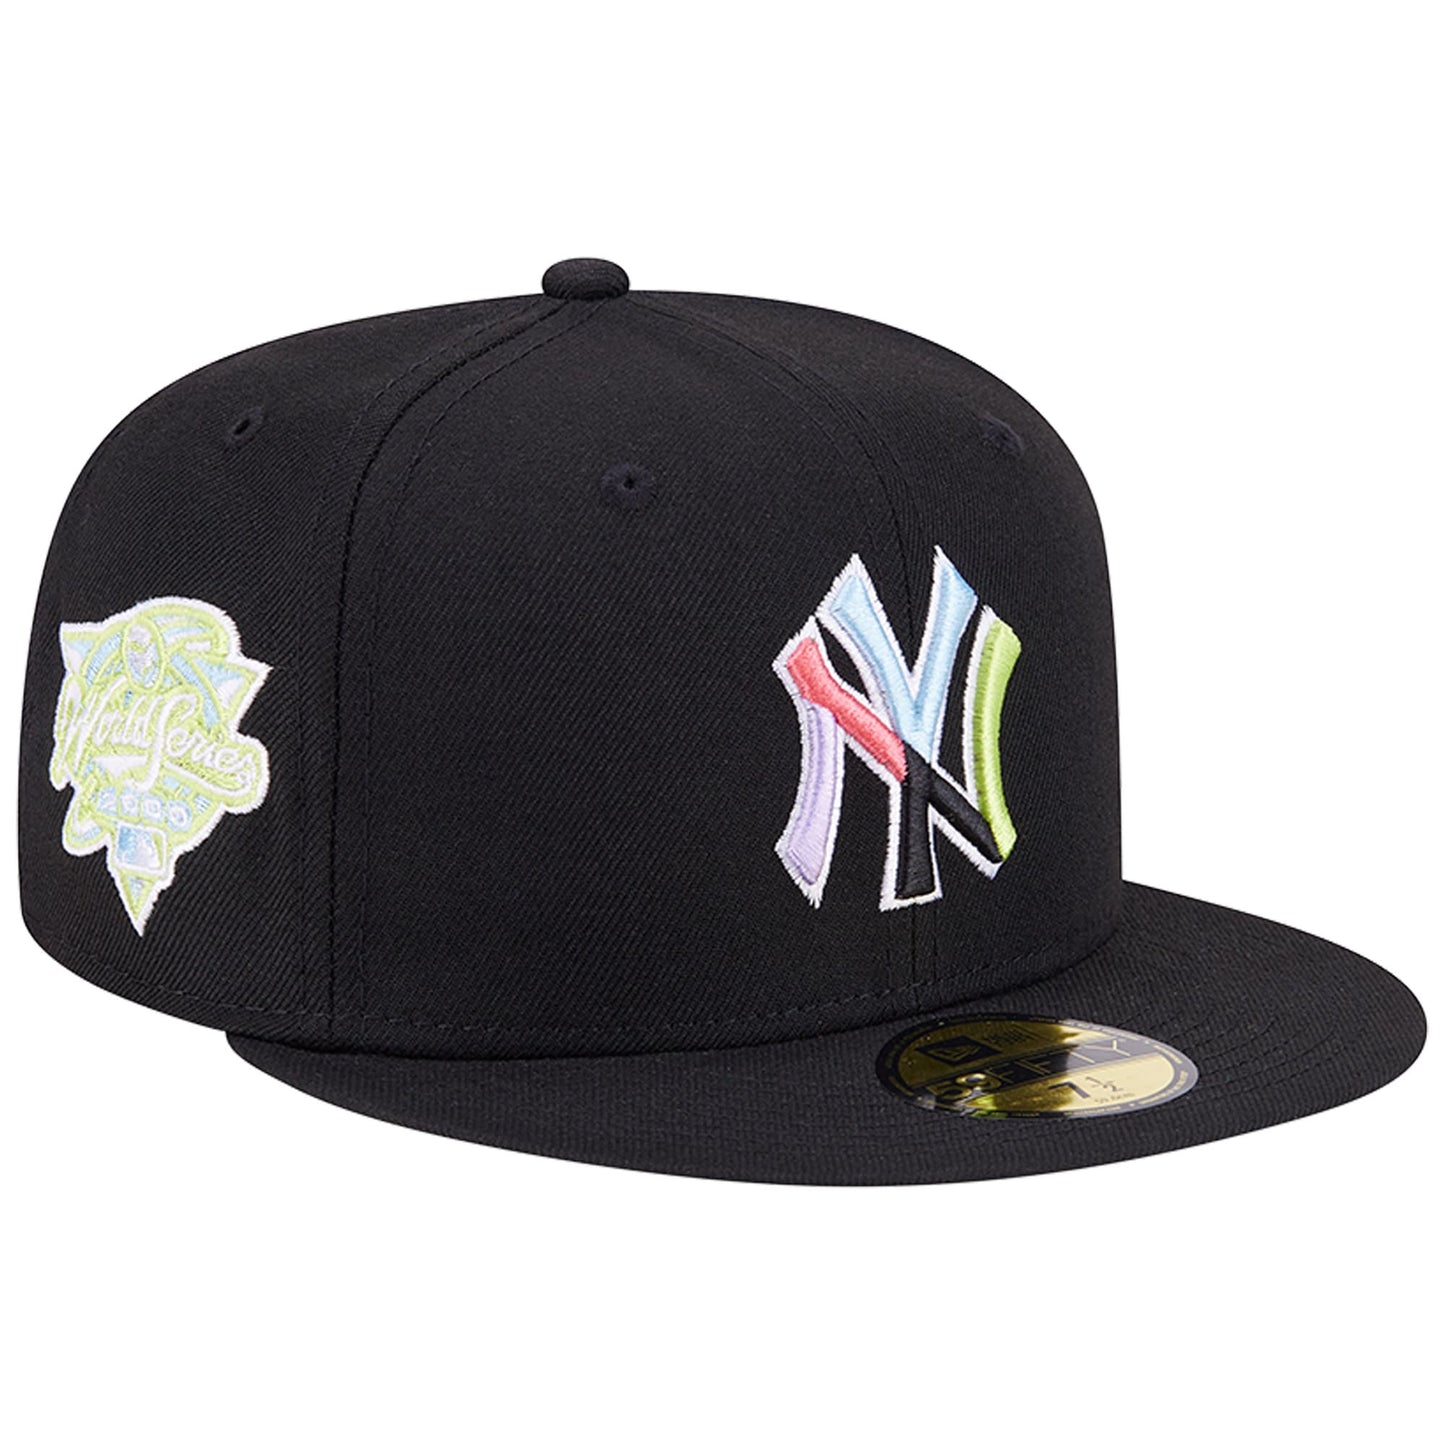 New York Yankees New Era Multi-Color Pack 59FIFTY Fitted Hat - Black